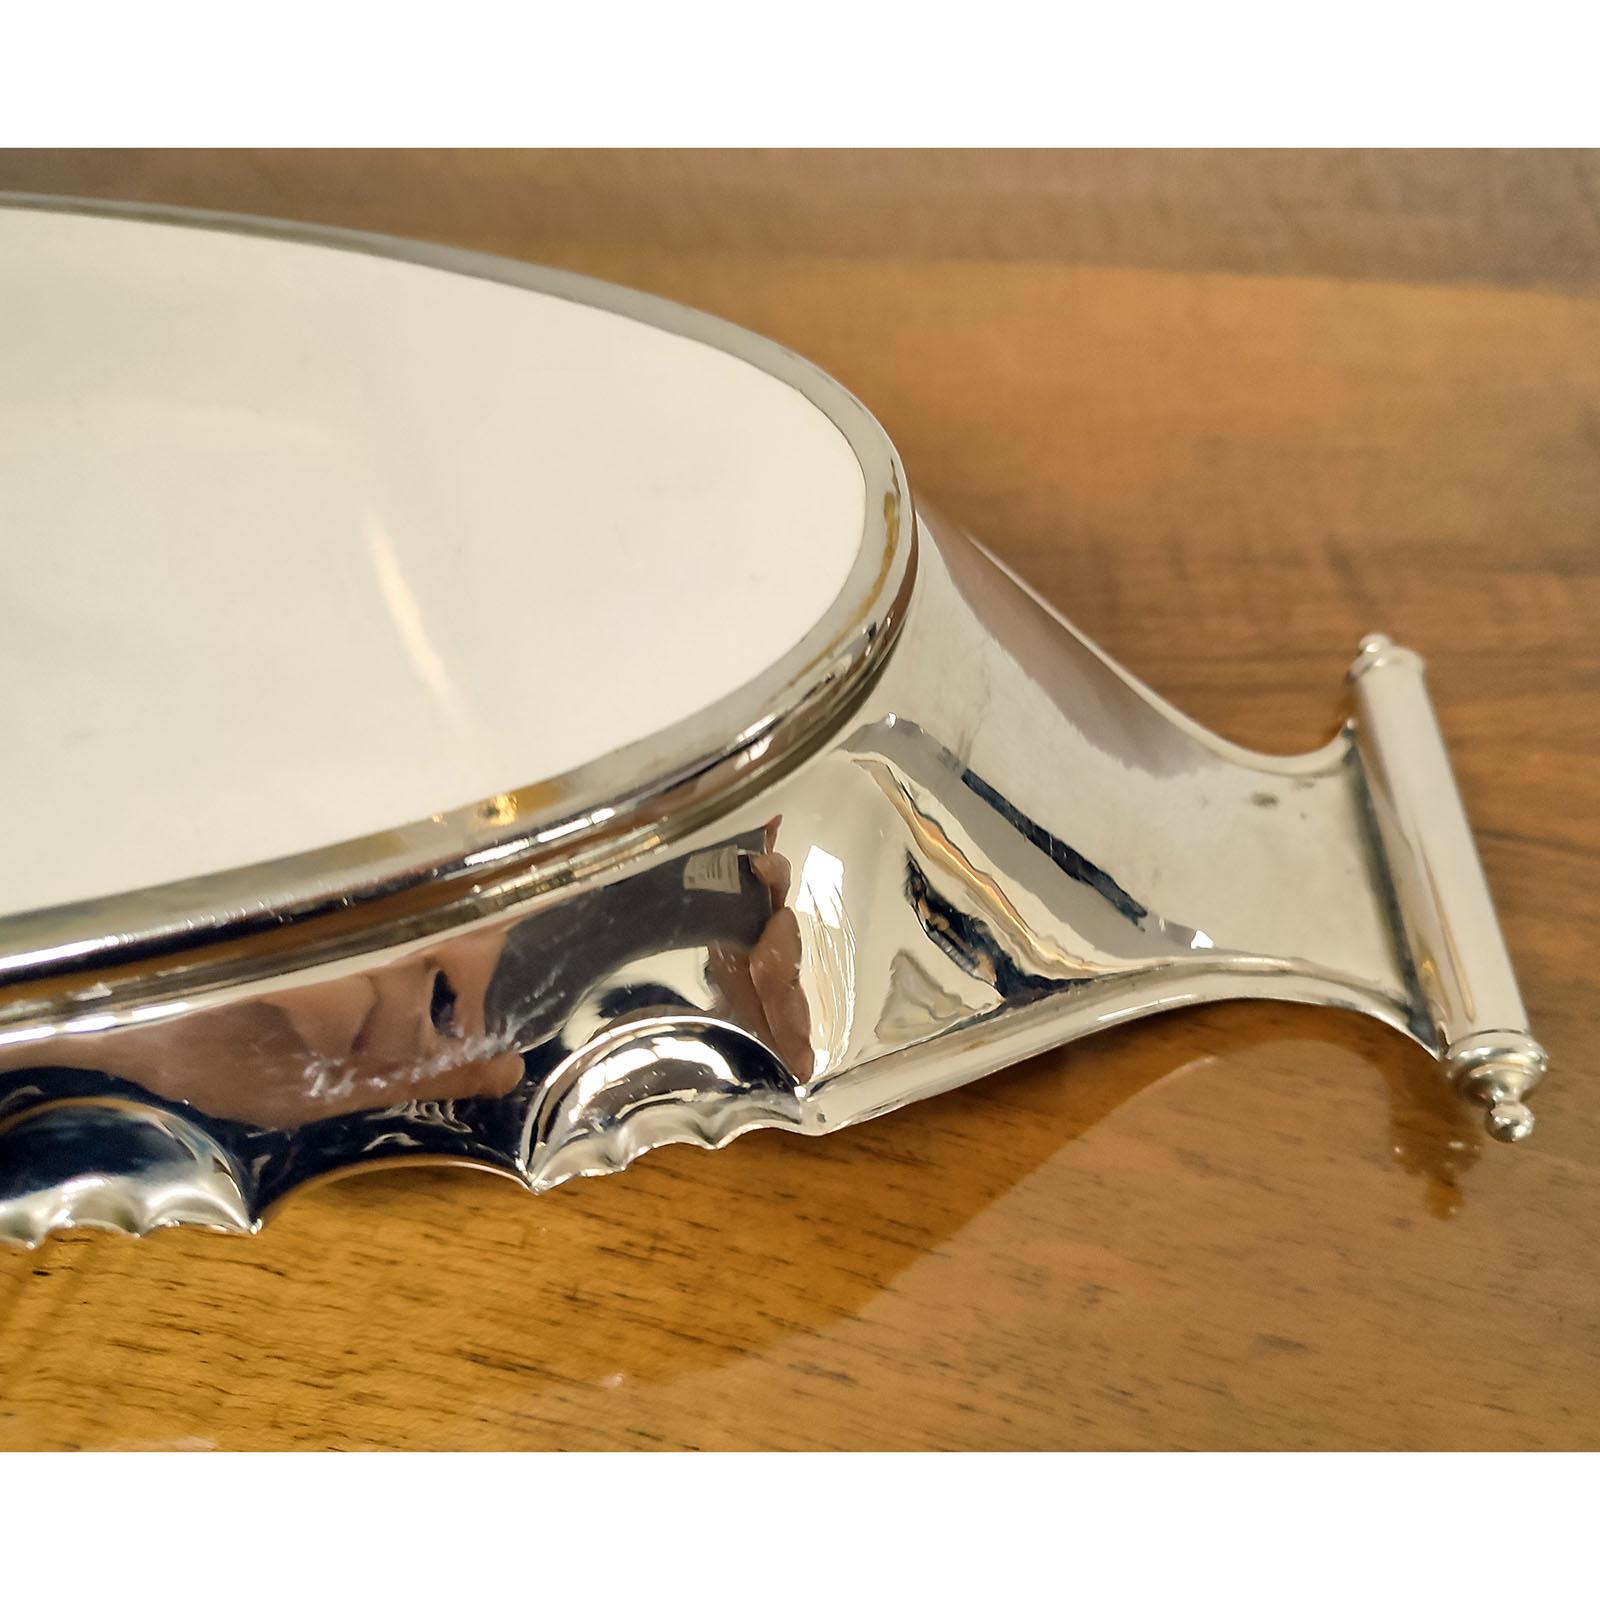 Art Nouveau Villeroy & Boch Silver Plated Serving Tray, circa 1900 For Sale 5